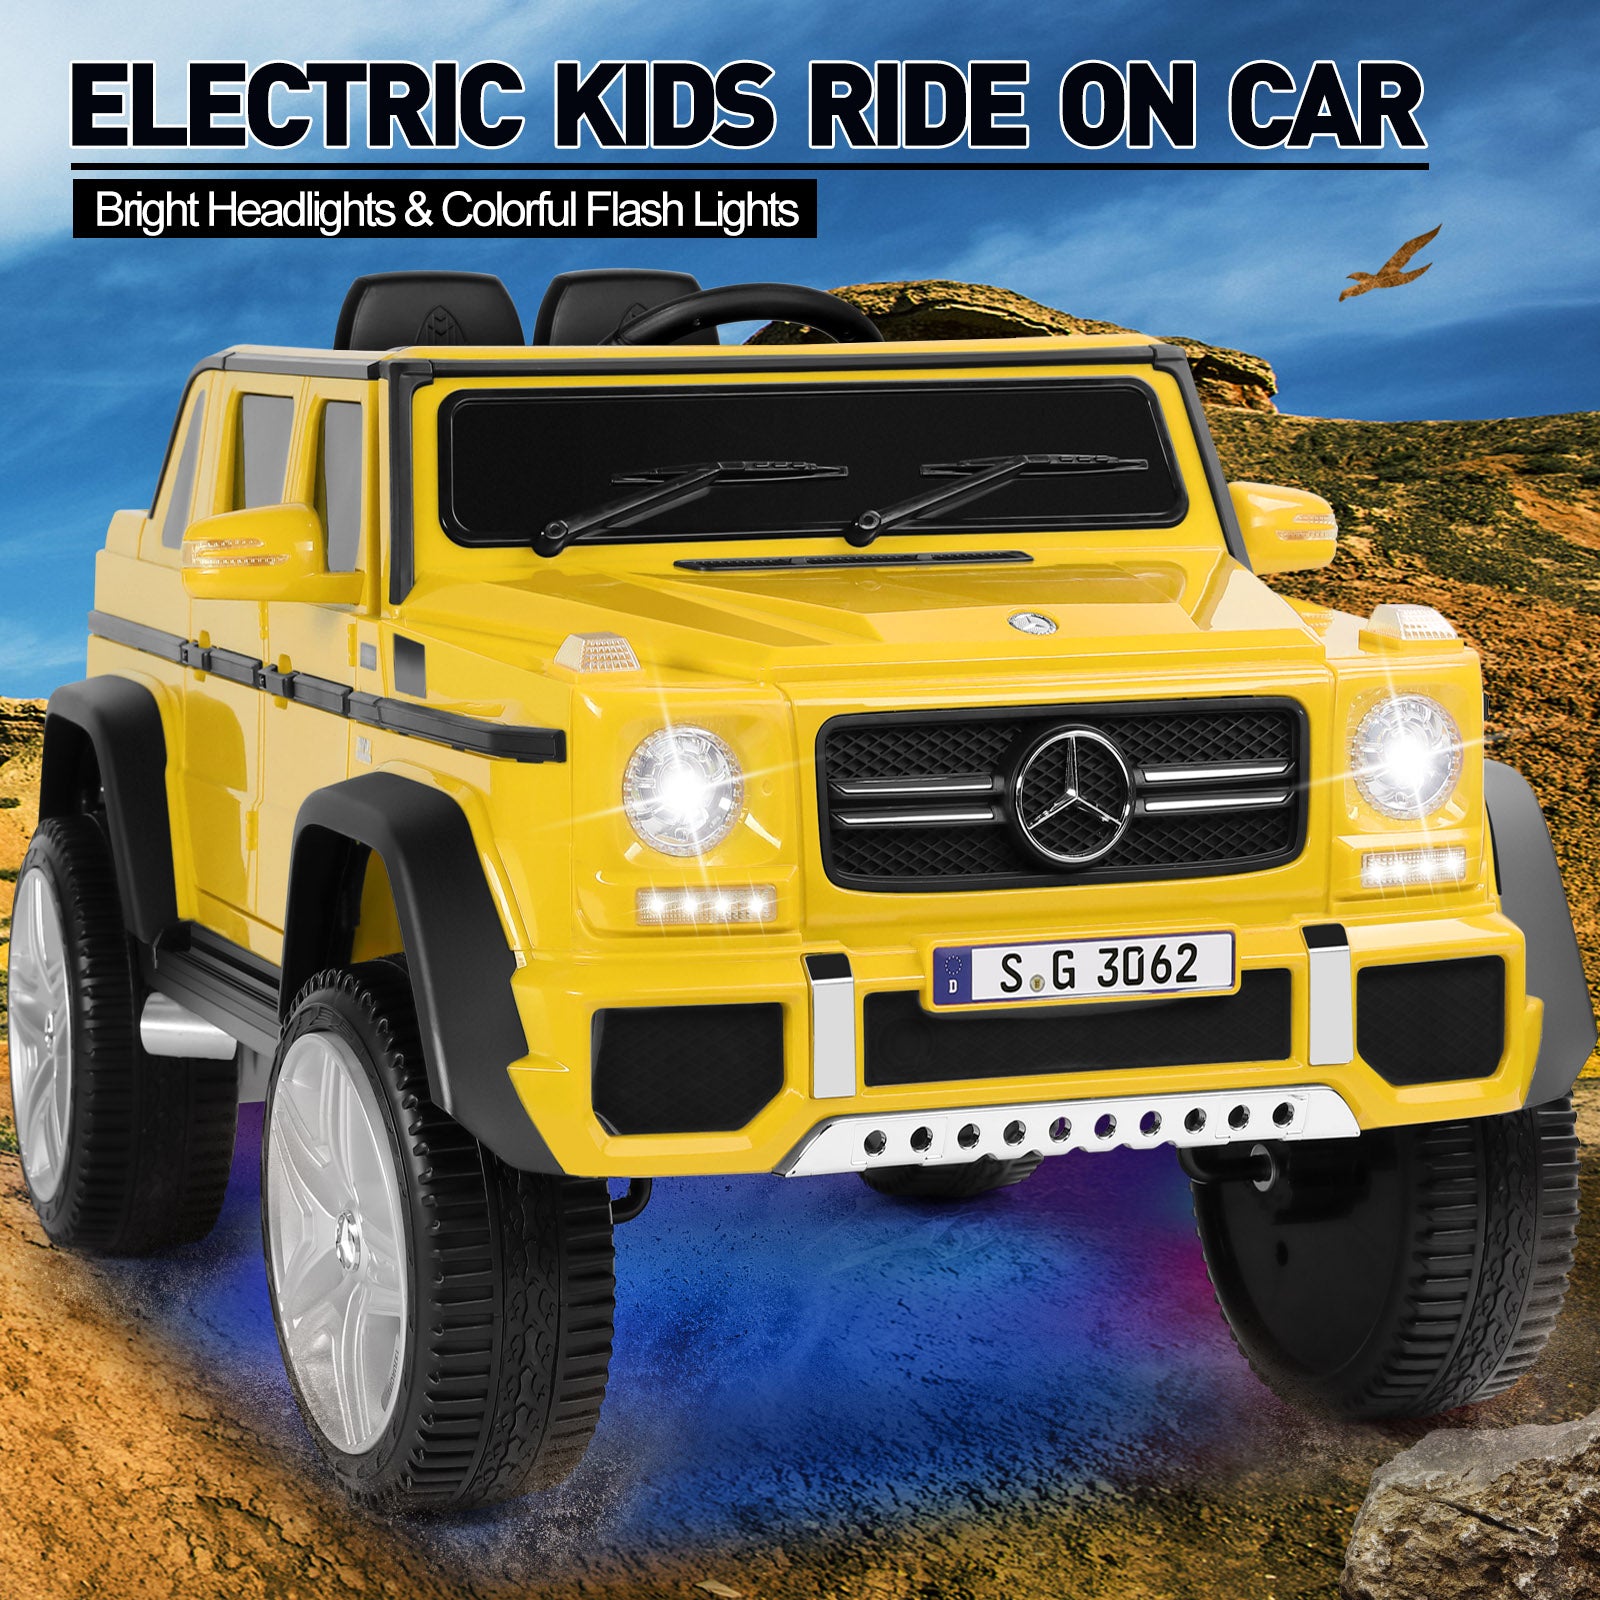 12V Kids Ride On Cars Lighted Toy Electric Car Licensed Mercedes-Benz Maybach G650S